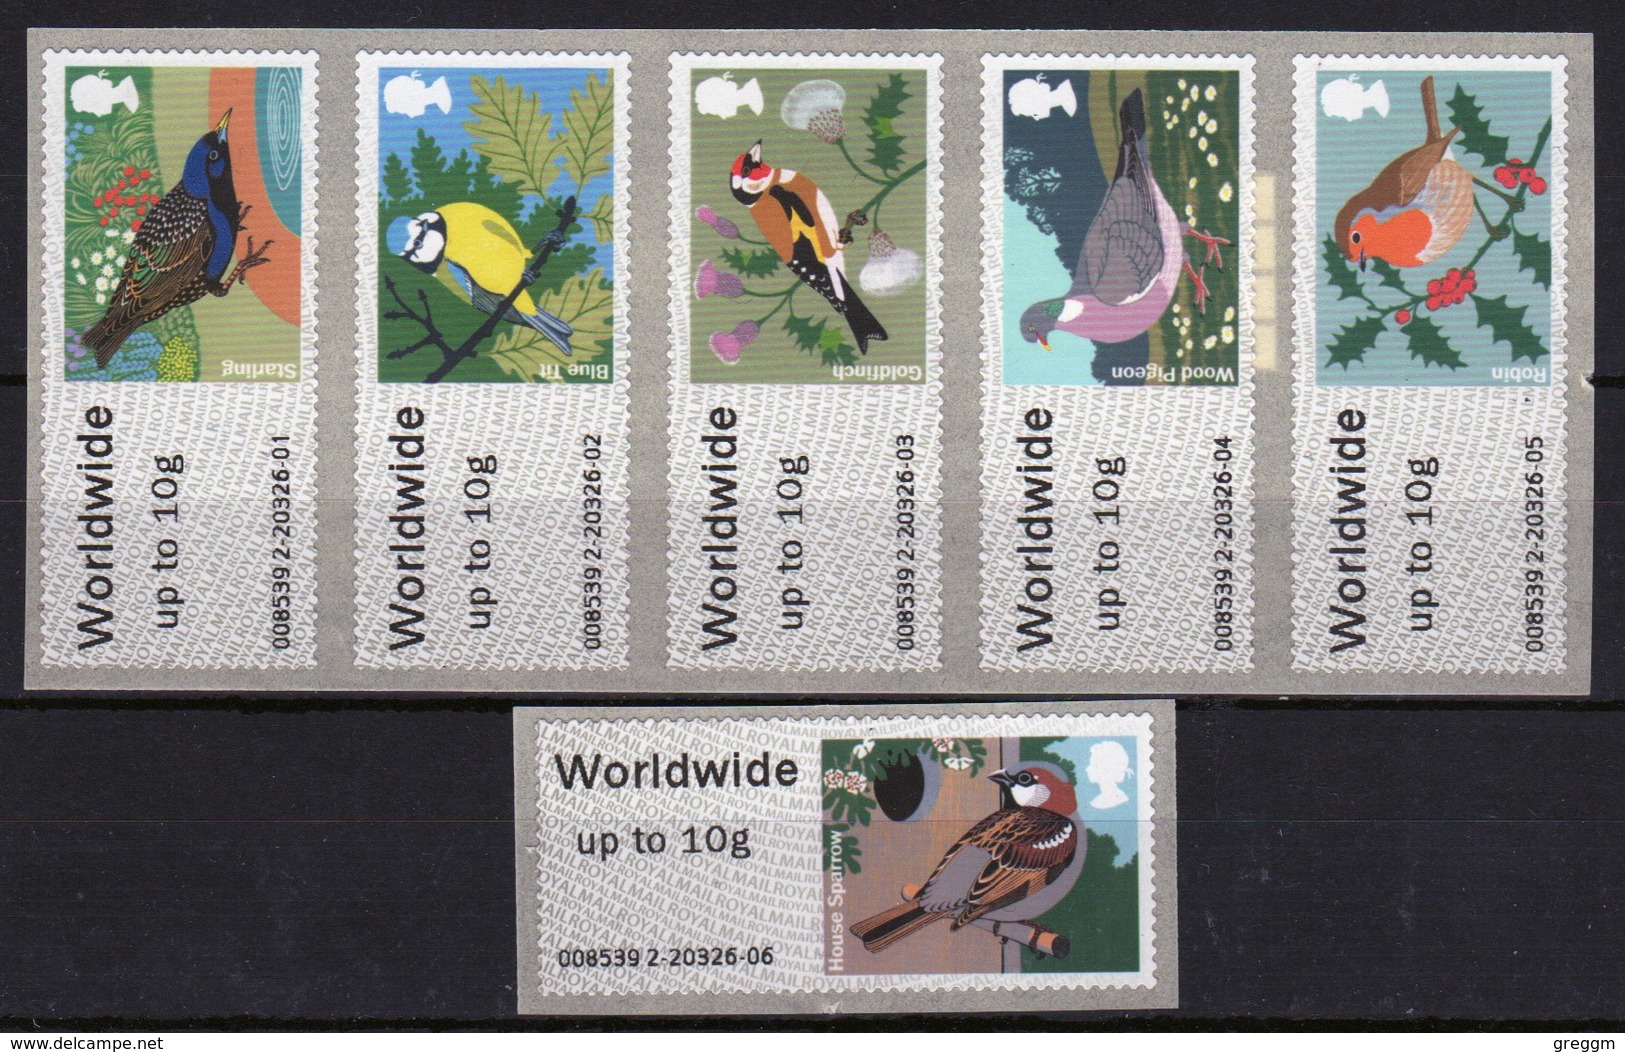 GB Post & Go Faststamps Birds Of Britain - (1st Series) - FS 2 - Post & Go (automaten)